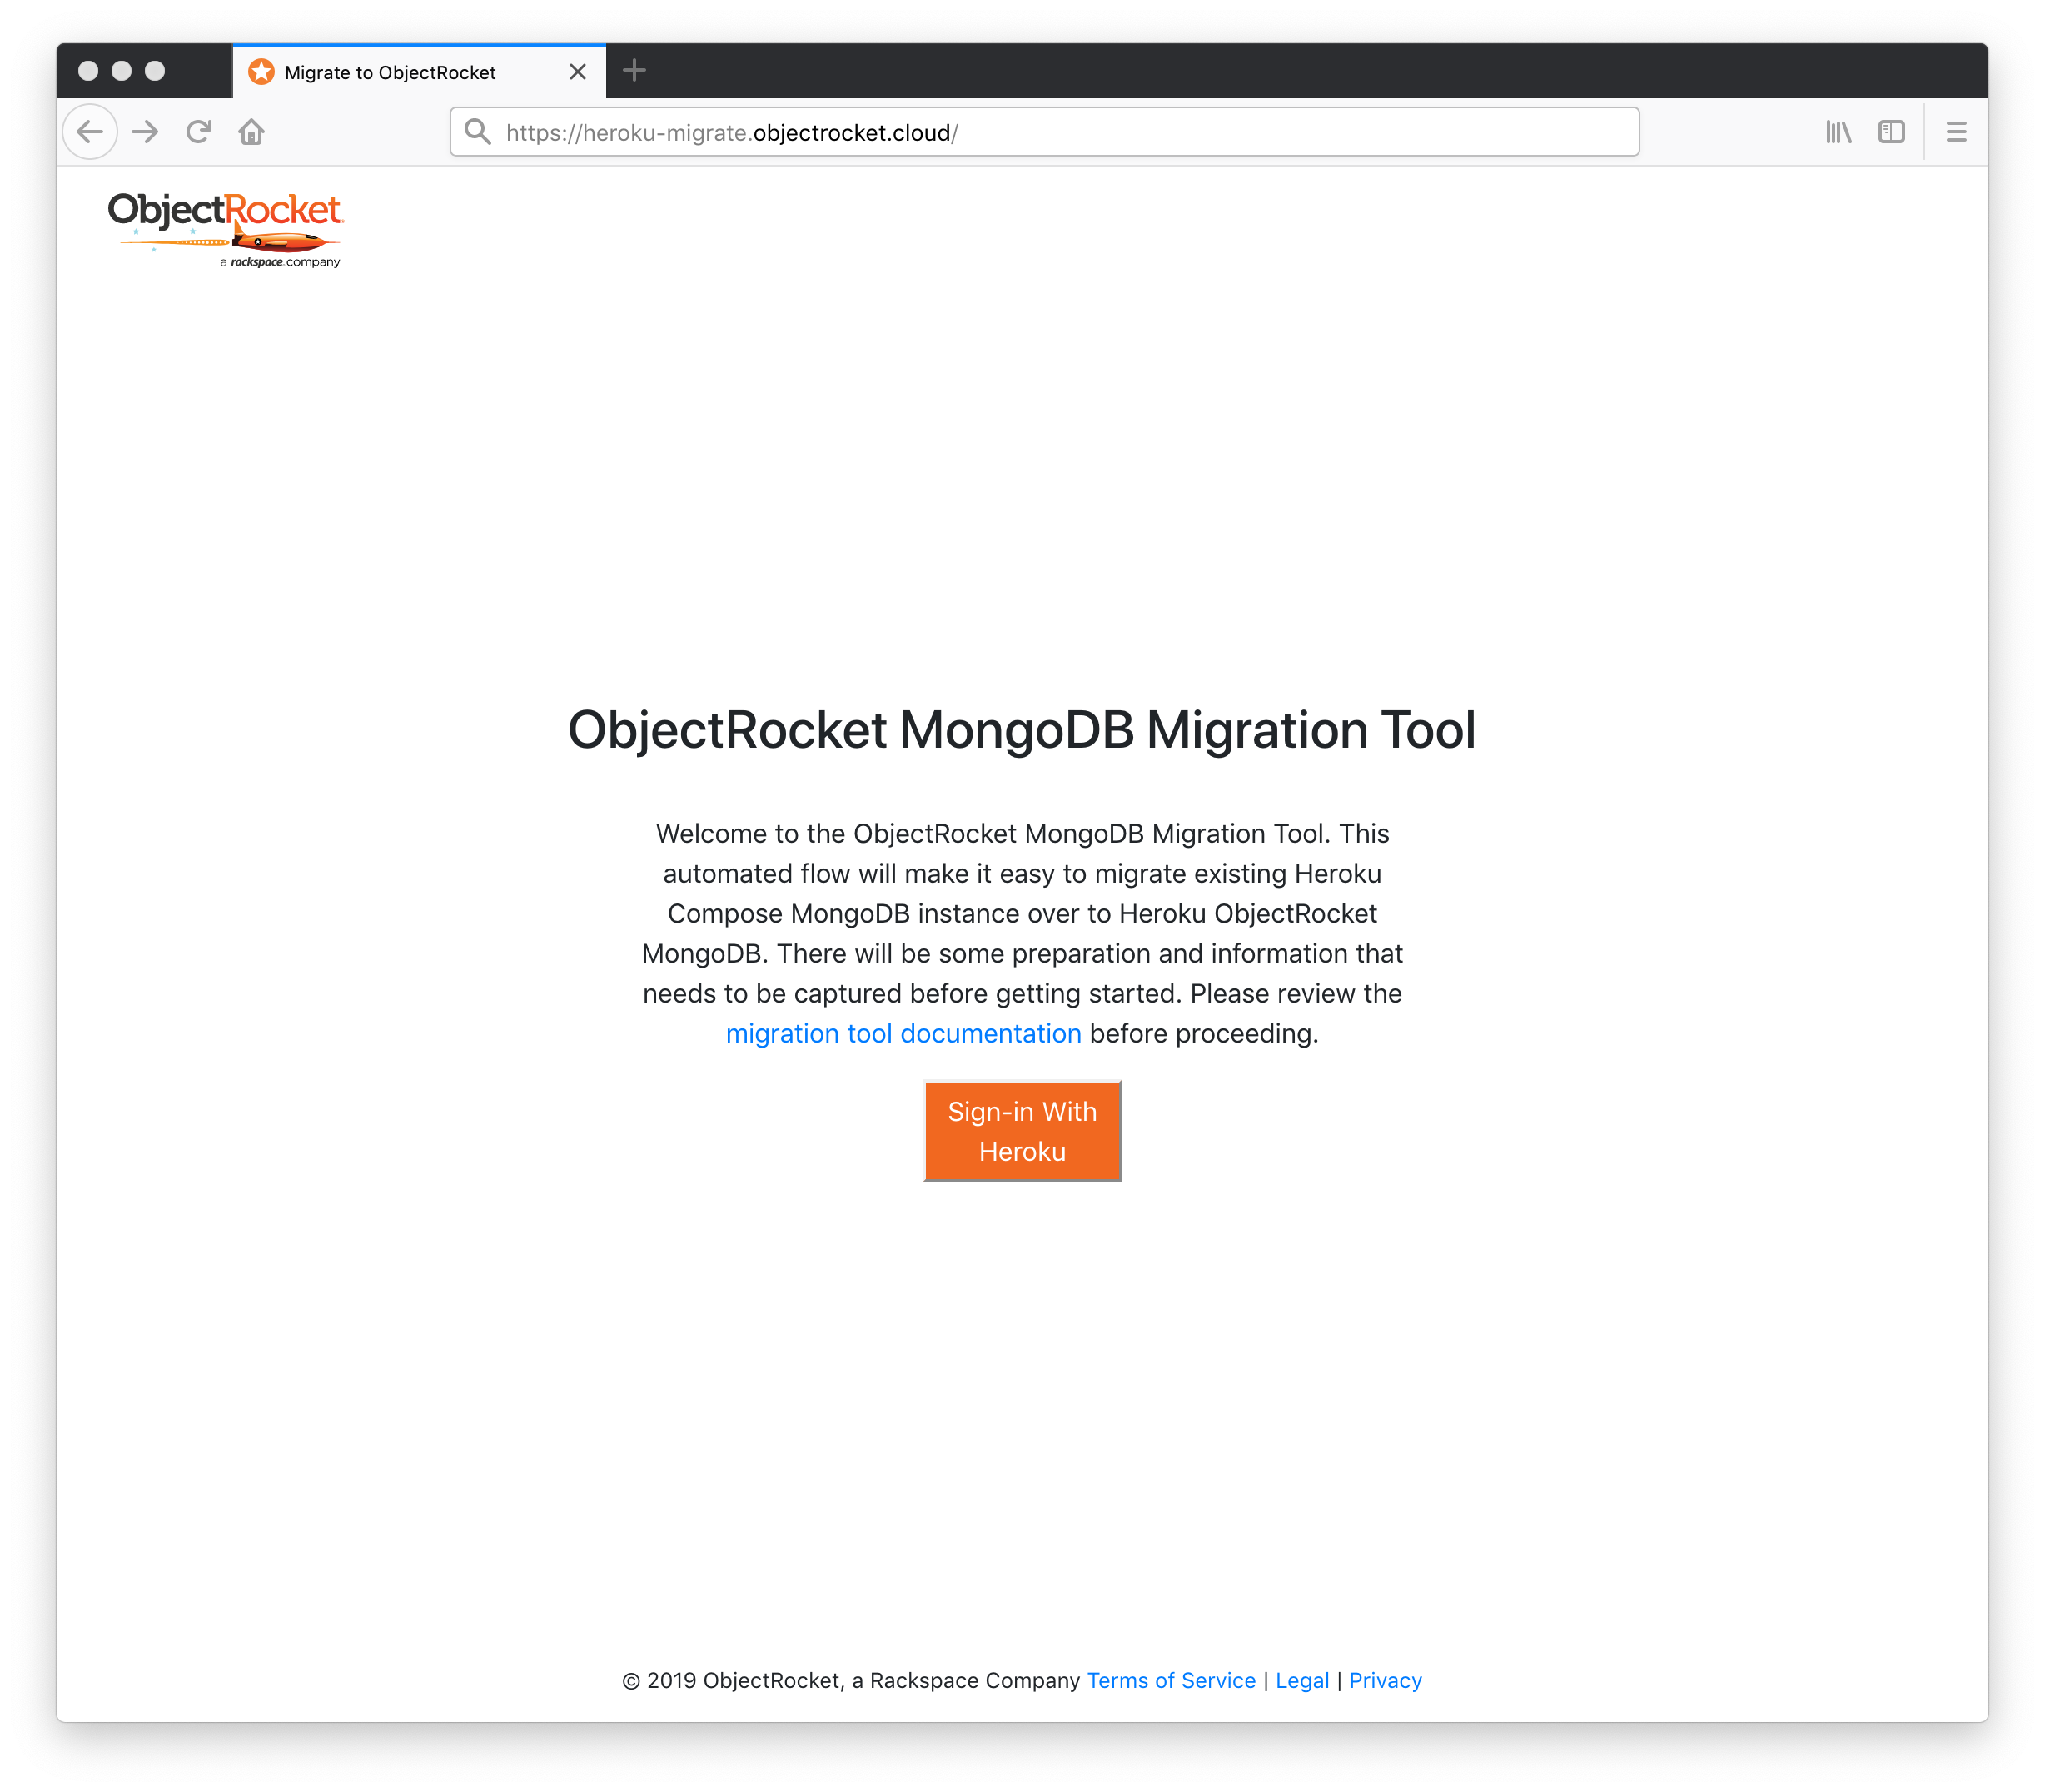 ObjectRocket MongoDB migration tool welcome page